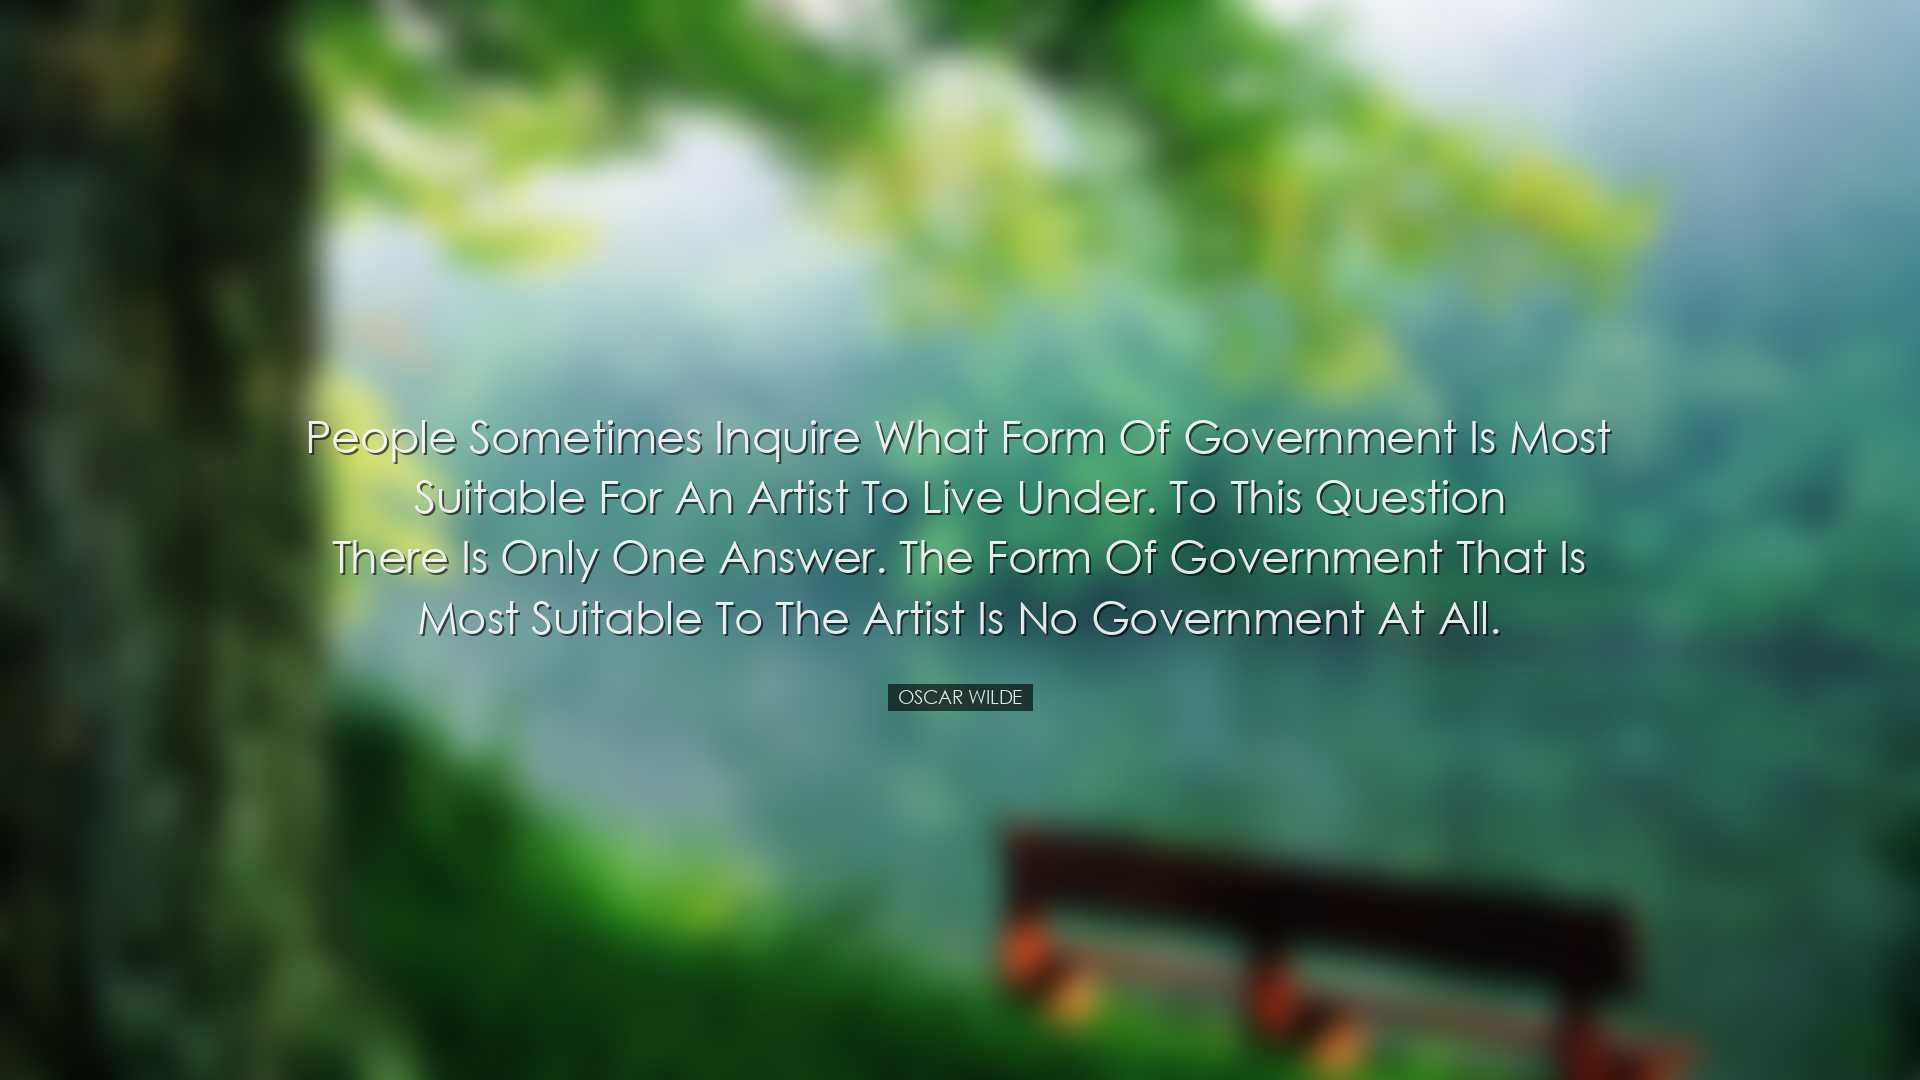 People sometimes inquire what form of government is most suitable